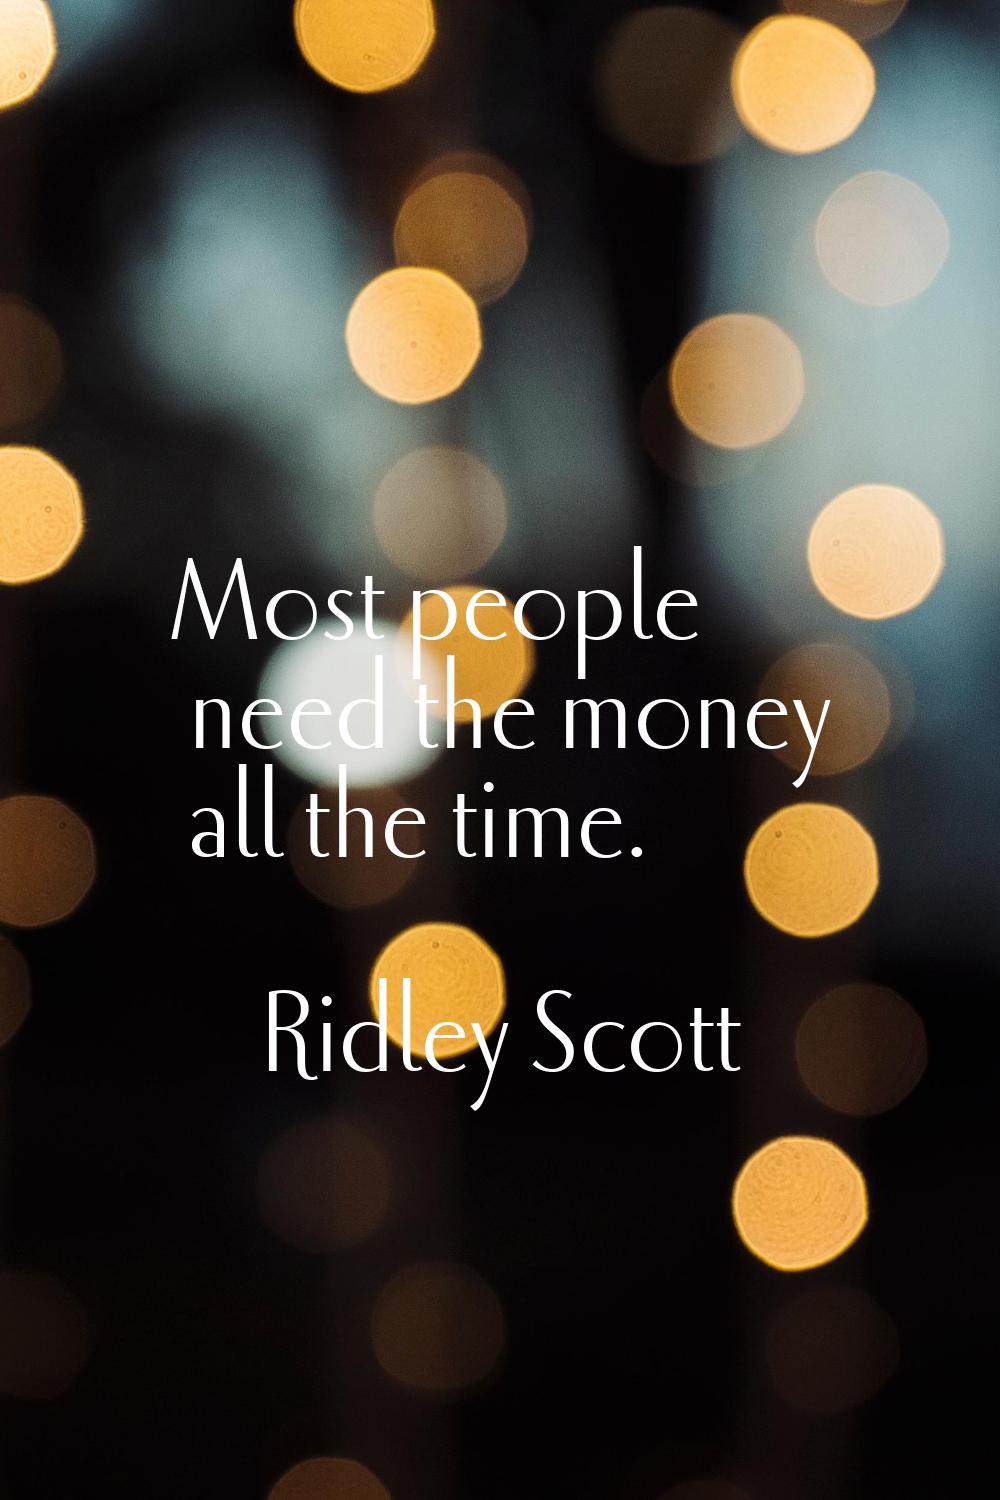 Most people need the money all the time.